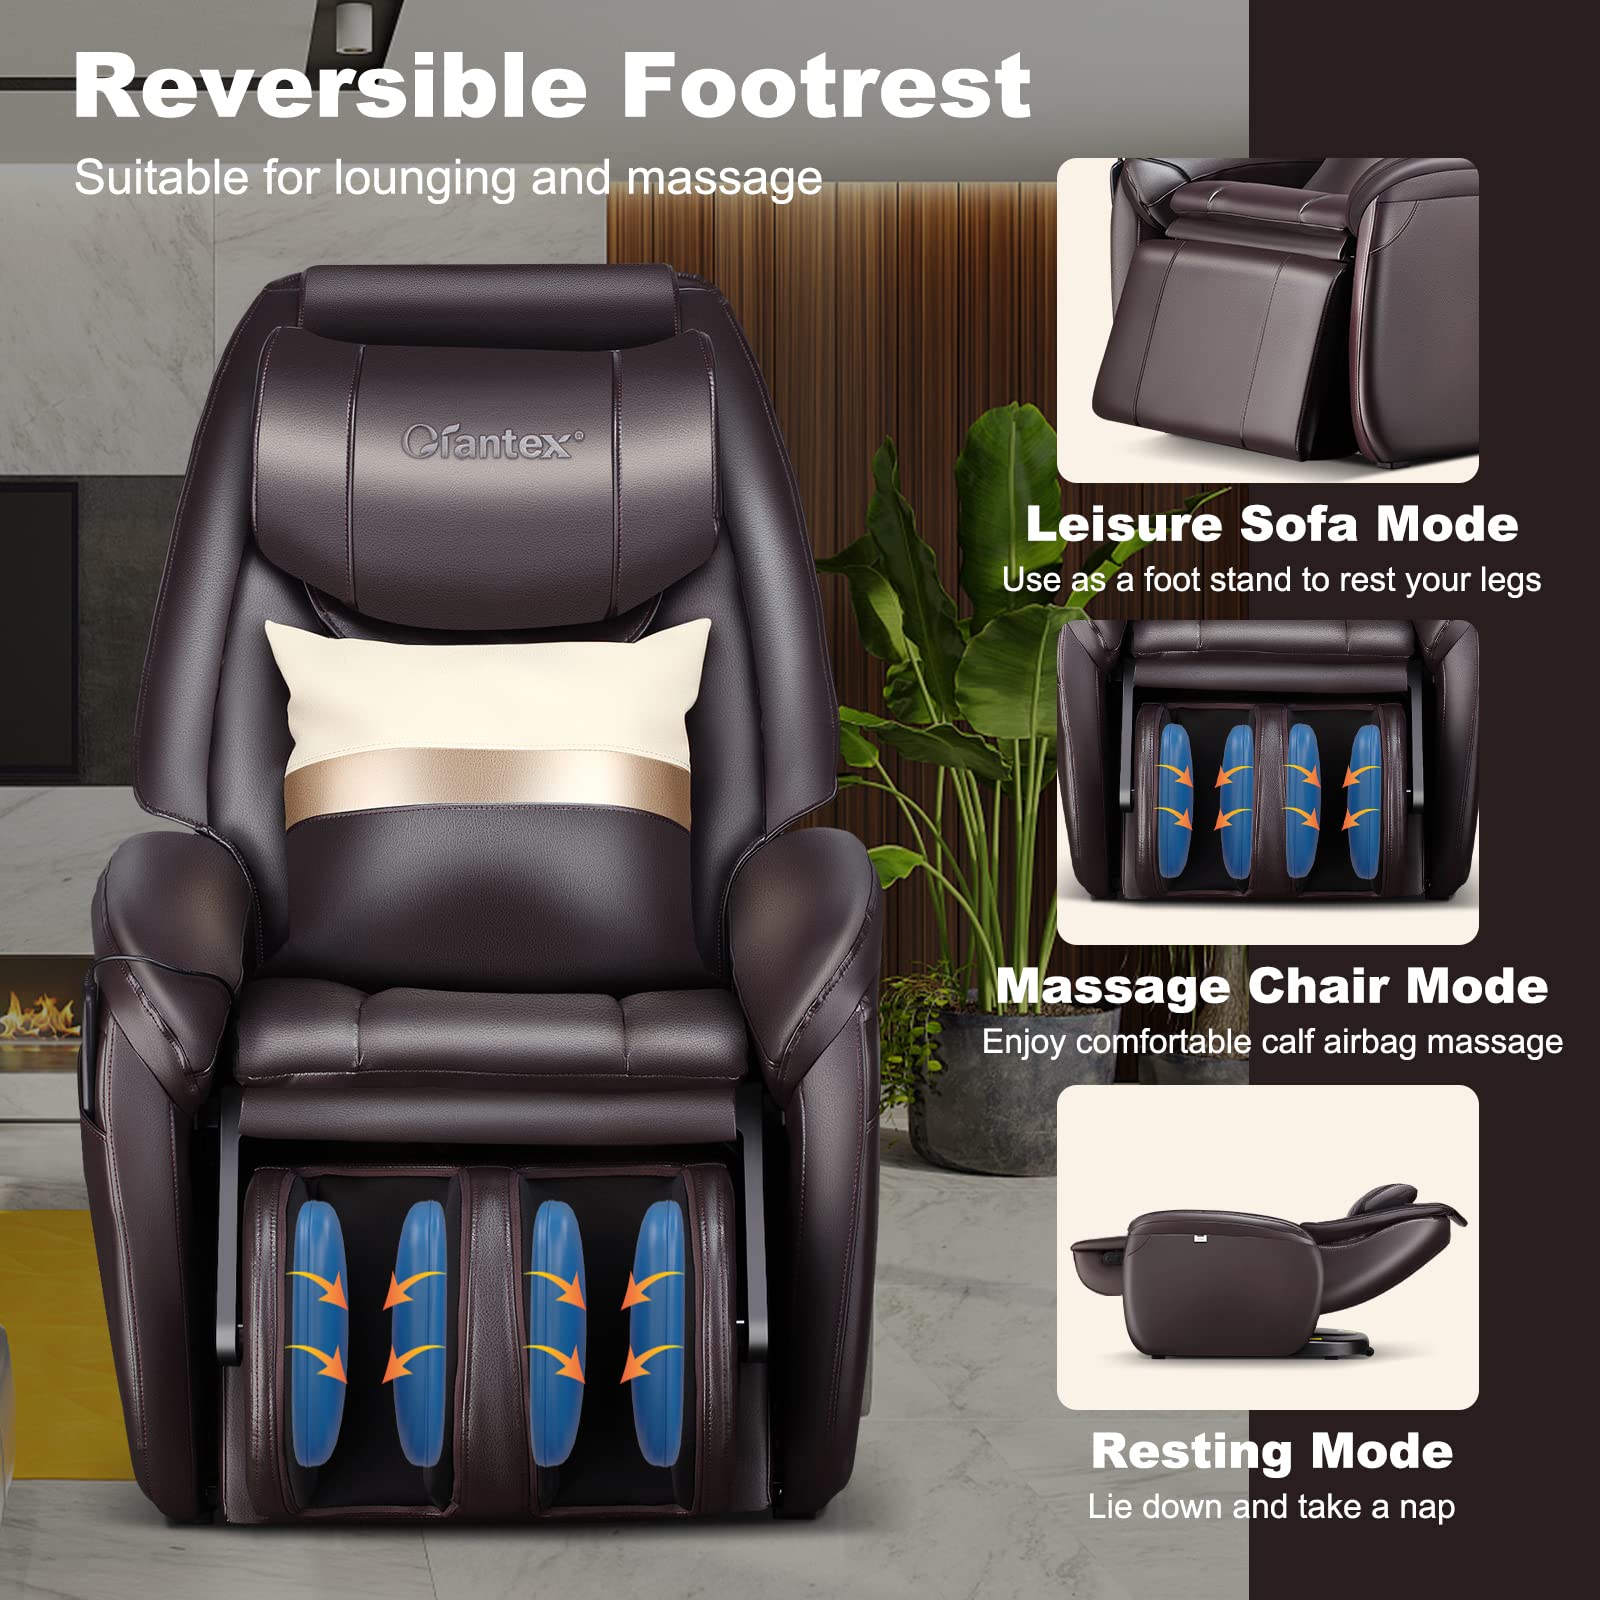 Giantex Full Body Massage Chair - Zero Gravity SL Track Electric Recliner with Reversible Footrest